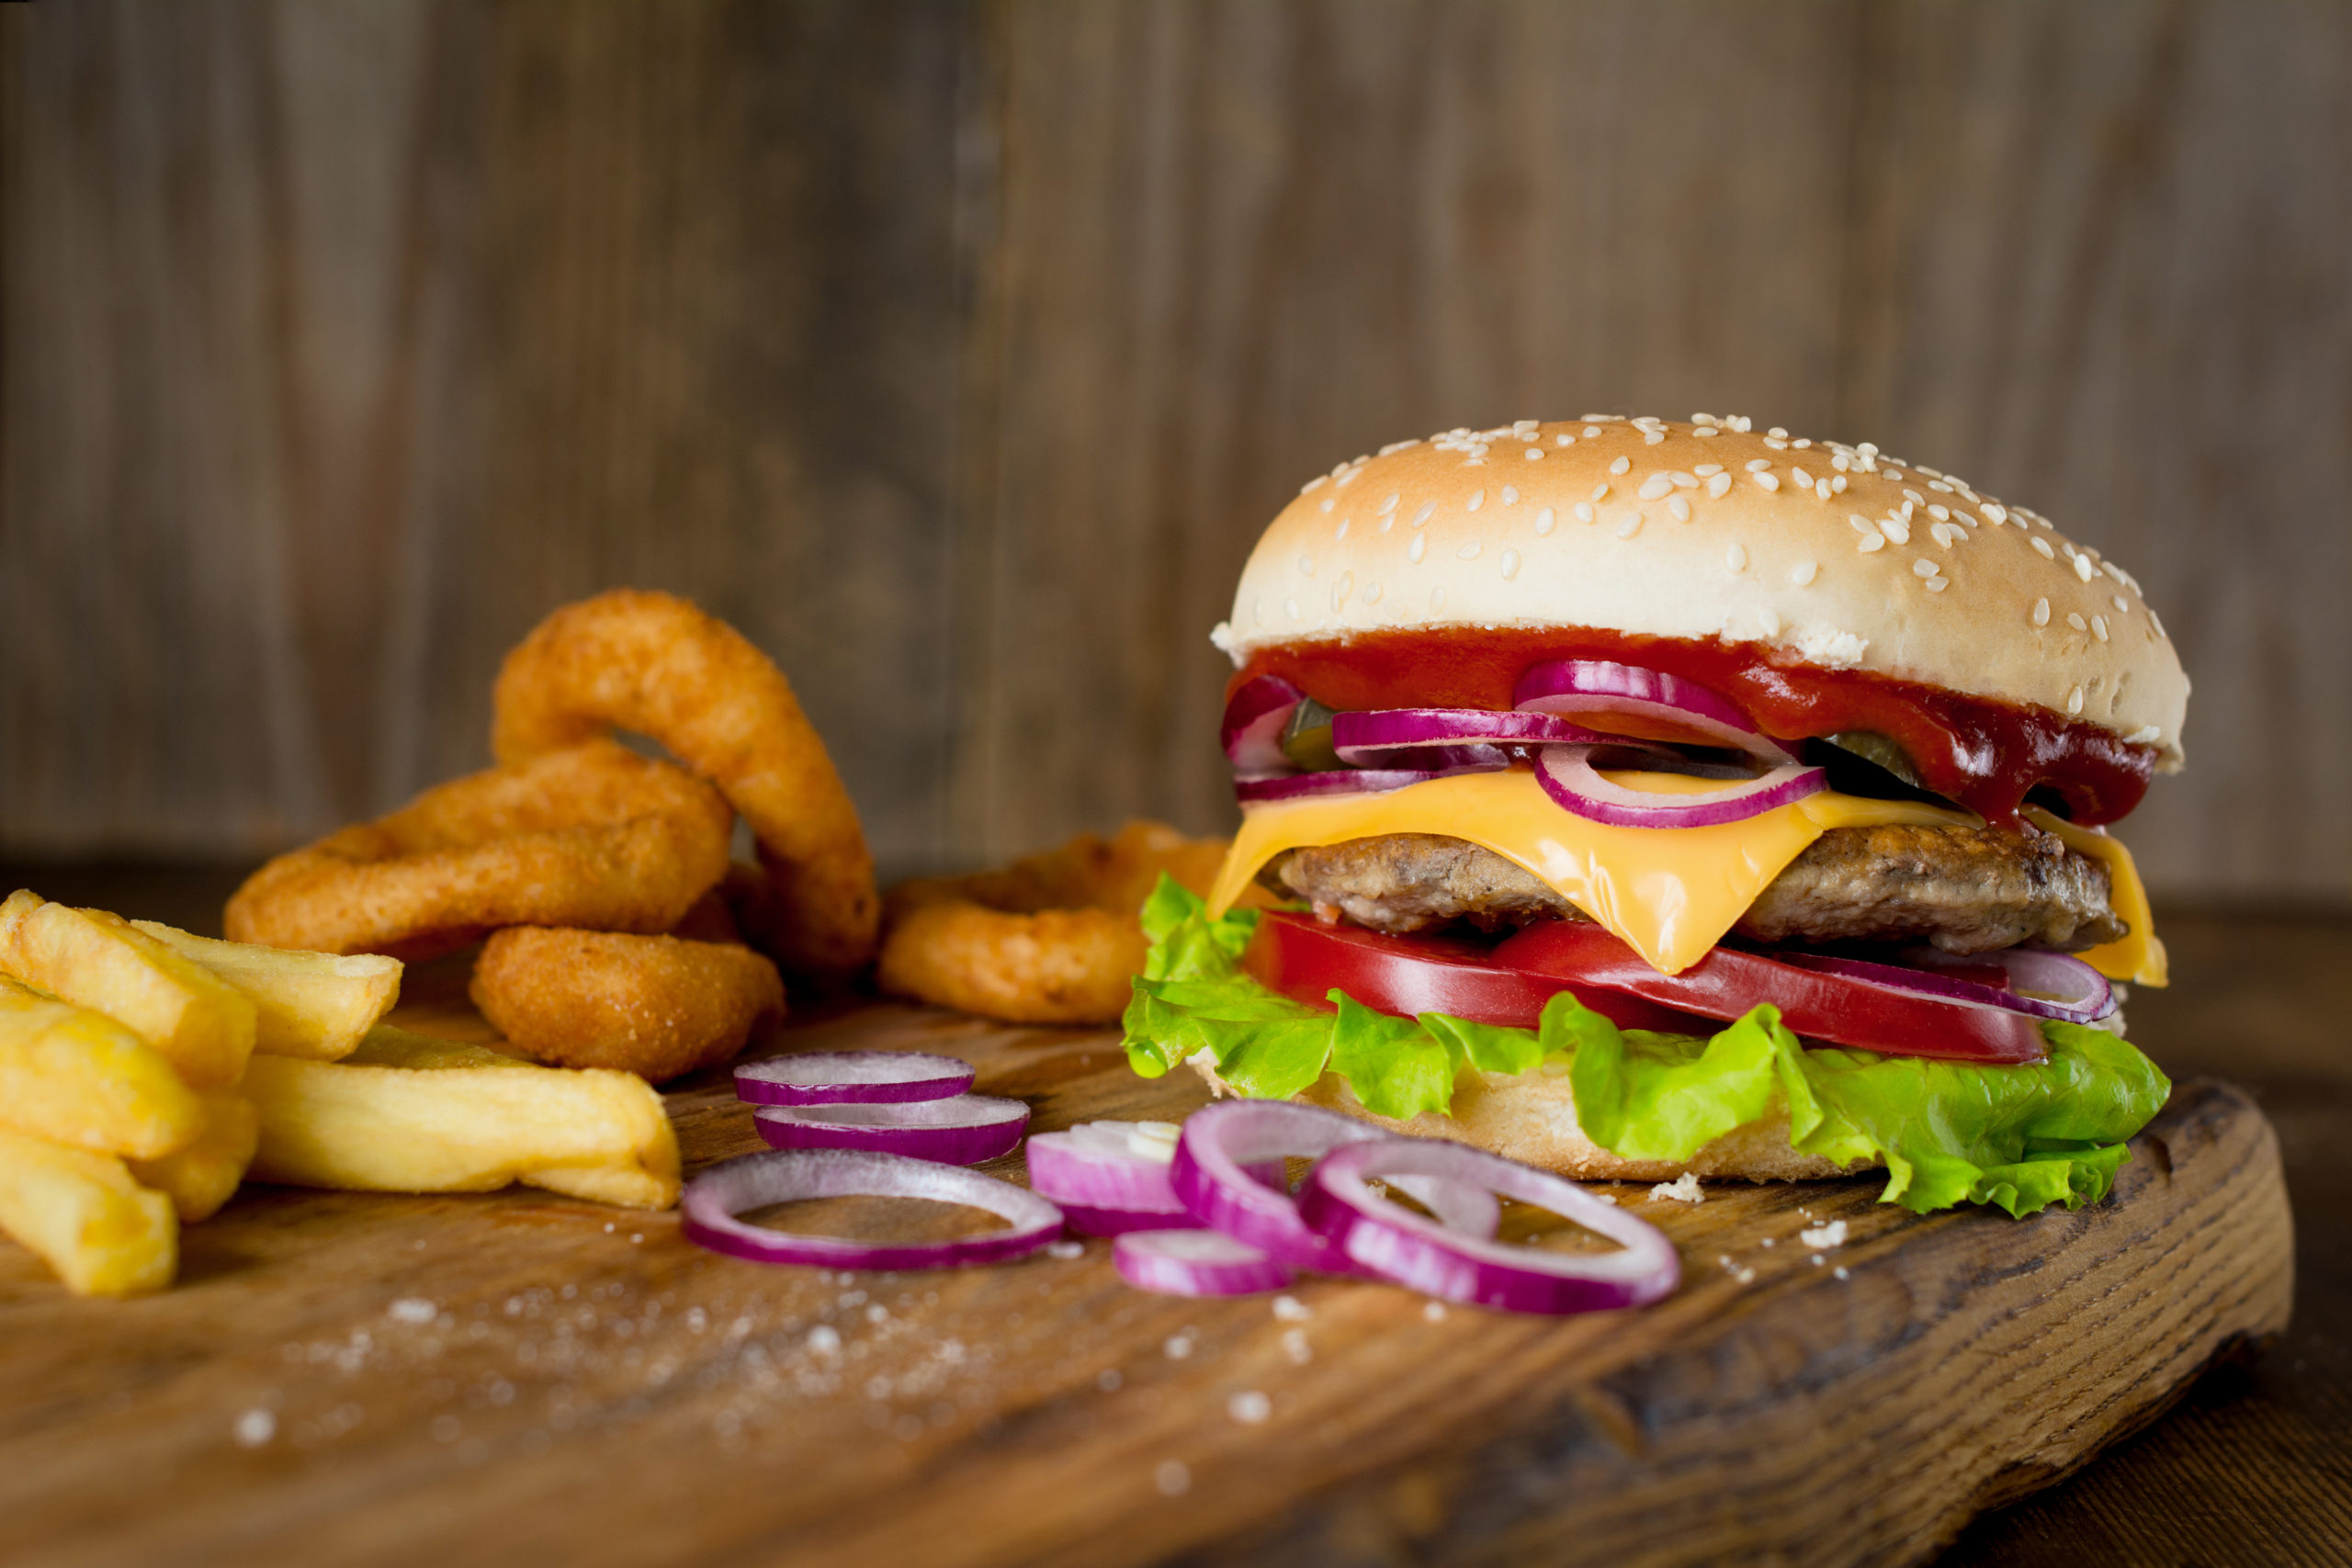 Cheeseburger, french fries and onion rings on wooden chopping board over wooden backdrop